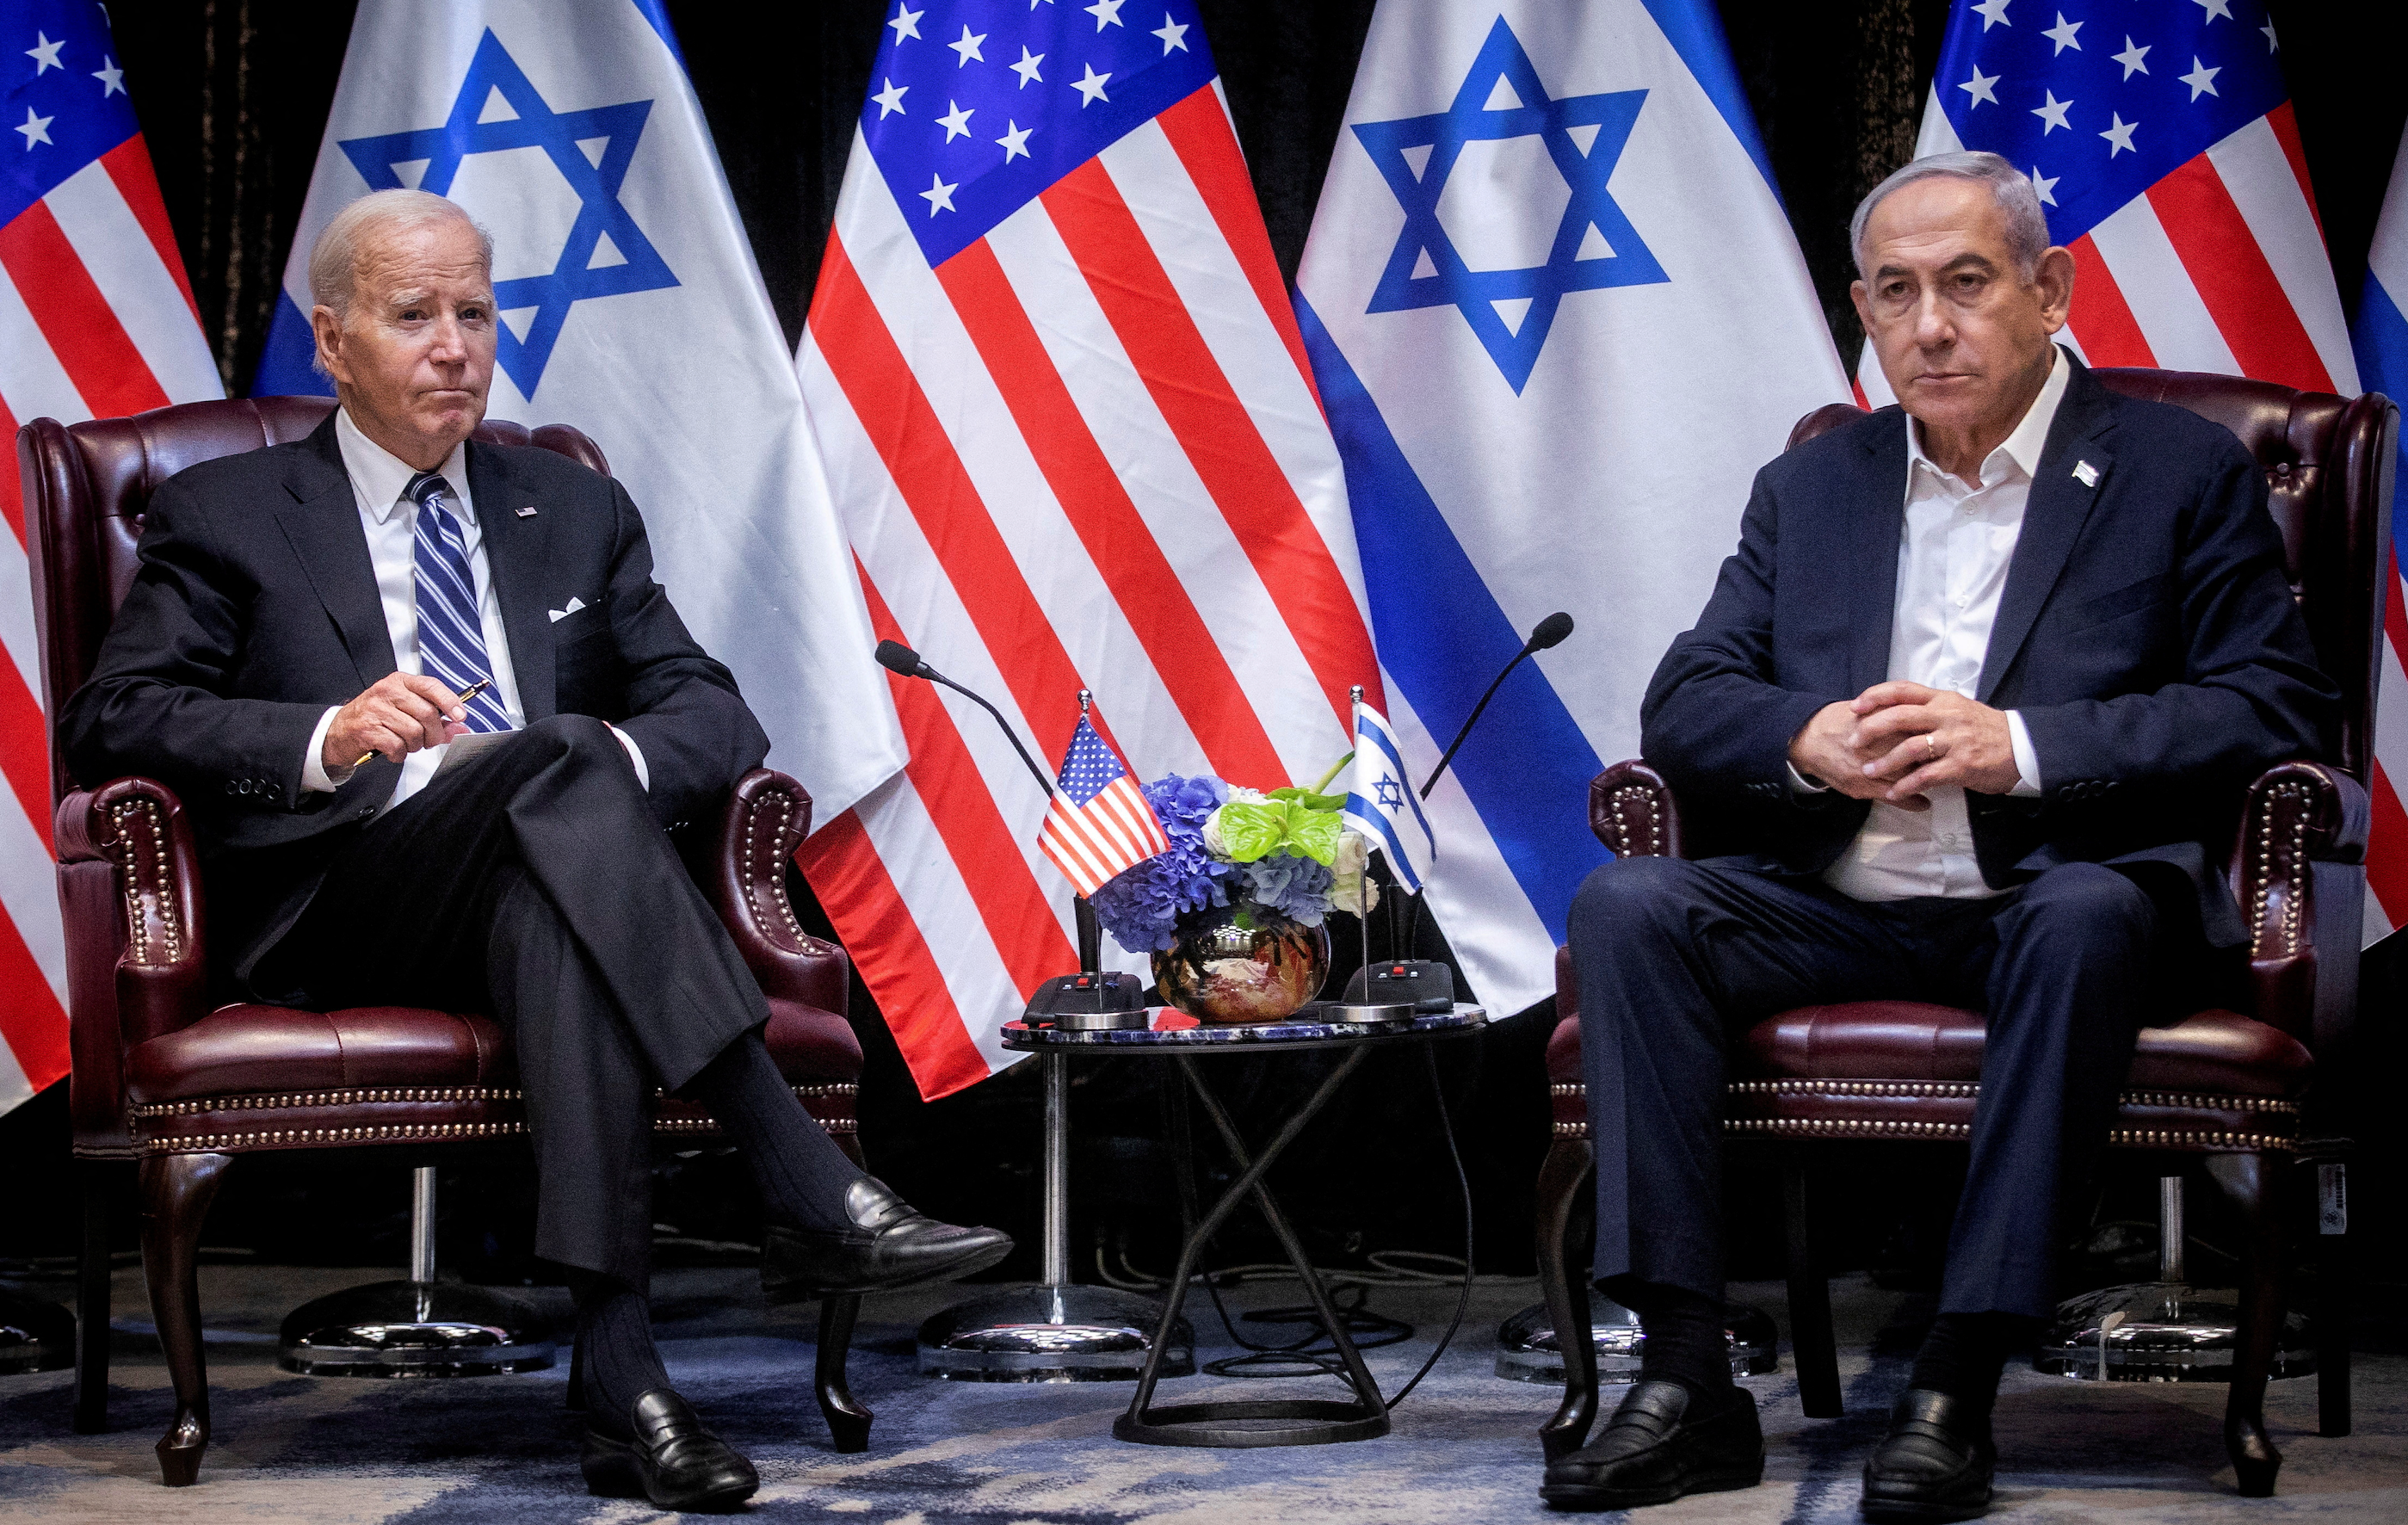 Biden tells Israel’s Netanyahu to conclude a ceasefire deal “without delay”